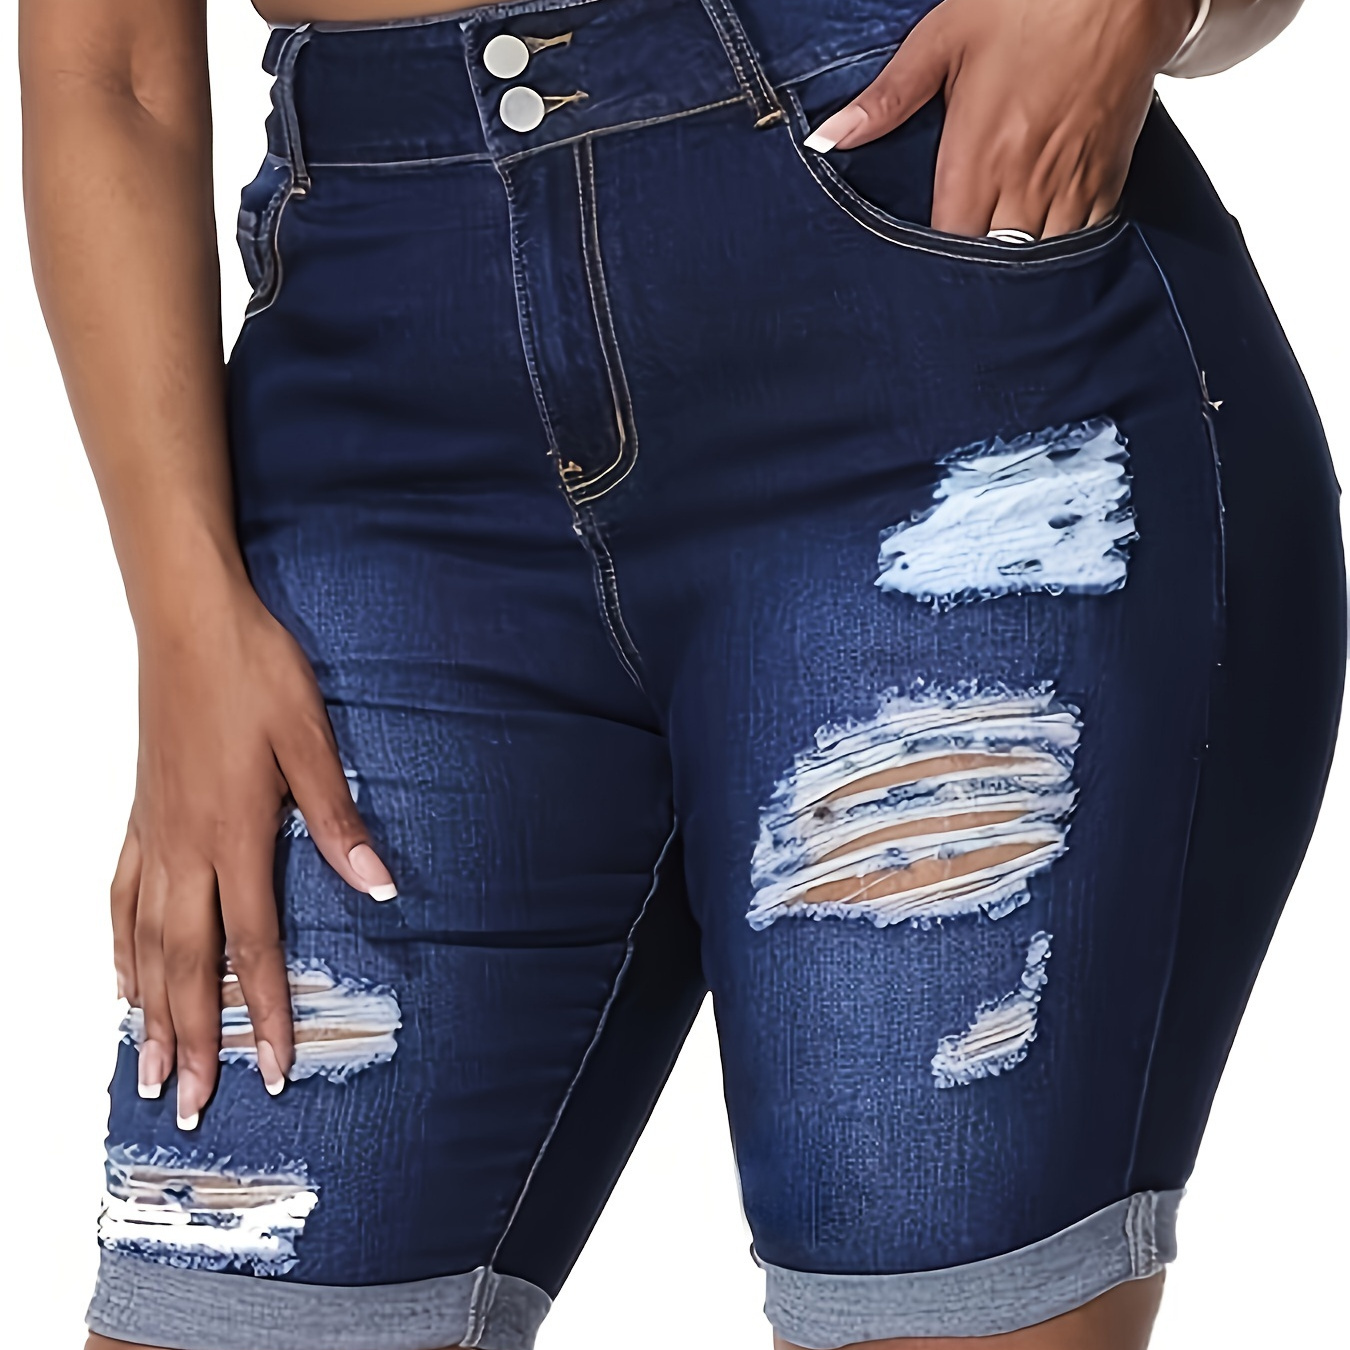 

Women's Plus Size High-waisted Stretchy Roll Up Hem Denim Bermuda Shorts, Casual Ripped Jean Knee-length Pants With Pockets For Summer Outfit